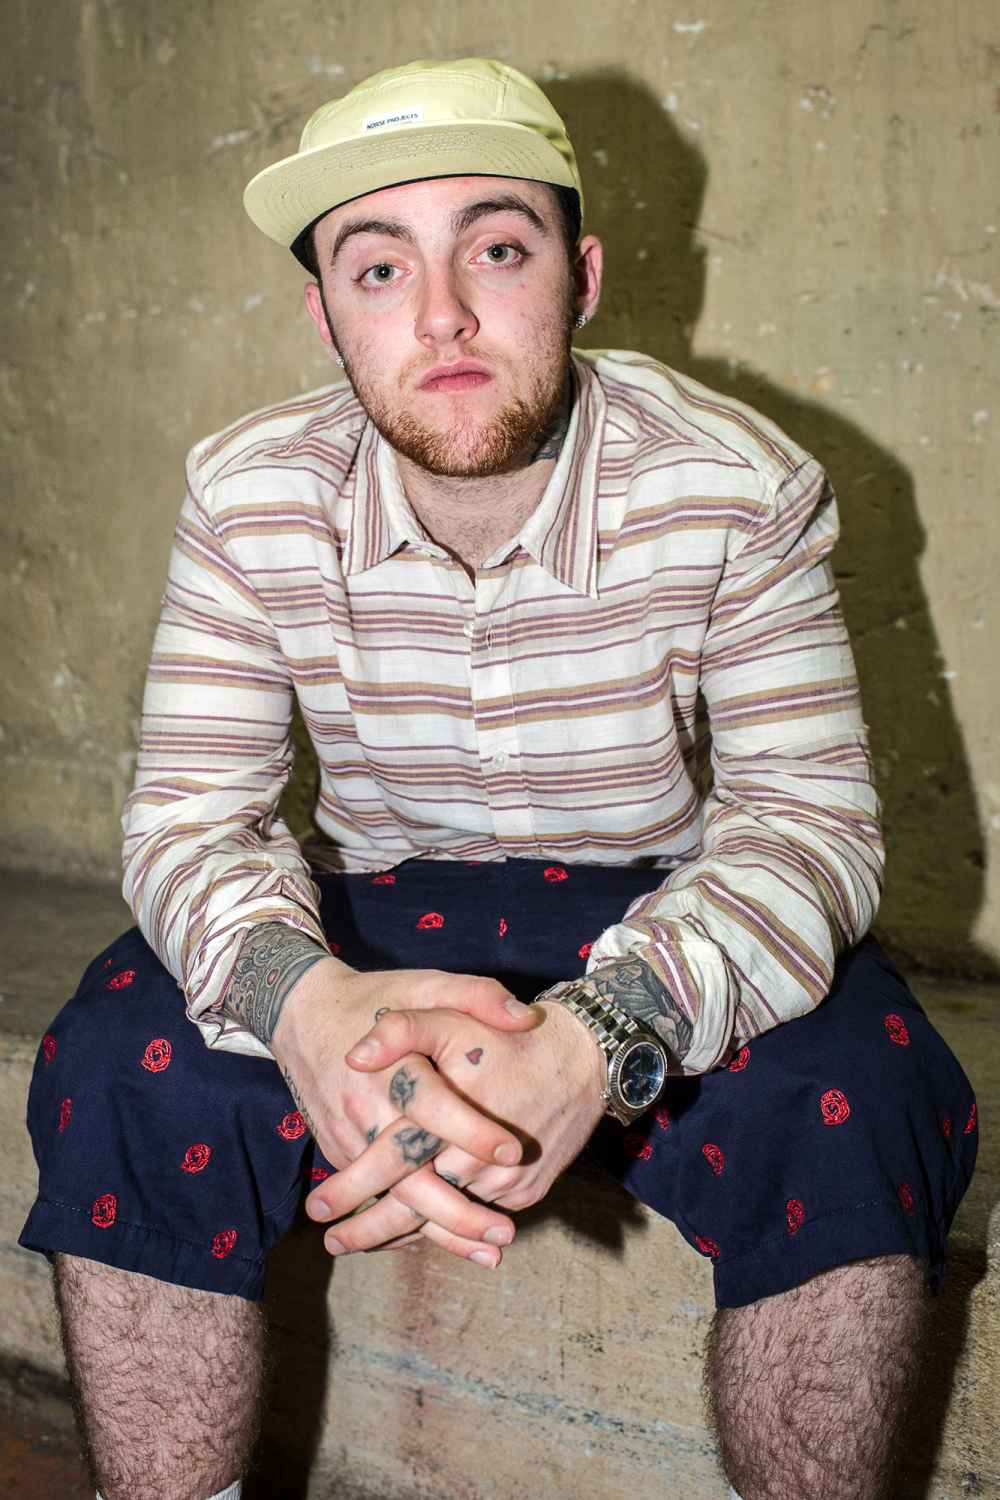 Mac Miller’s Family Calls for Boycott of ‘Exploitative’ Book About His Life